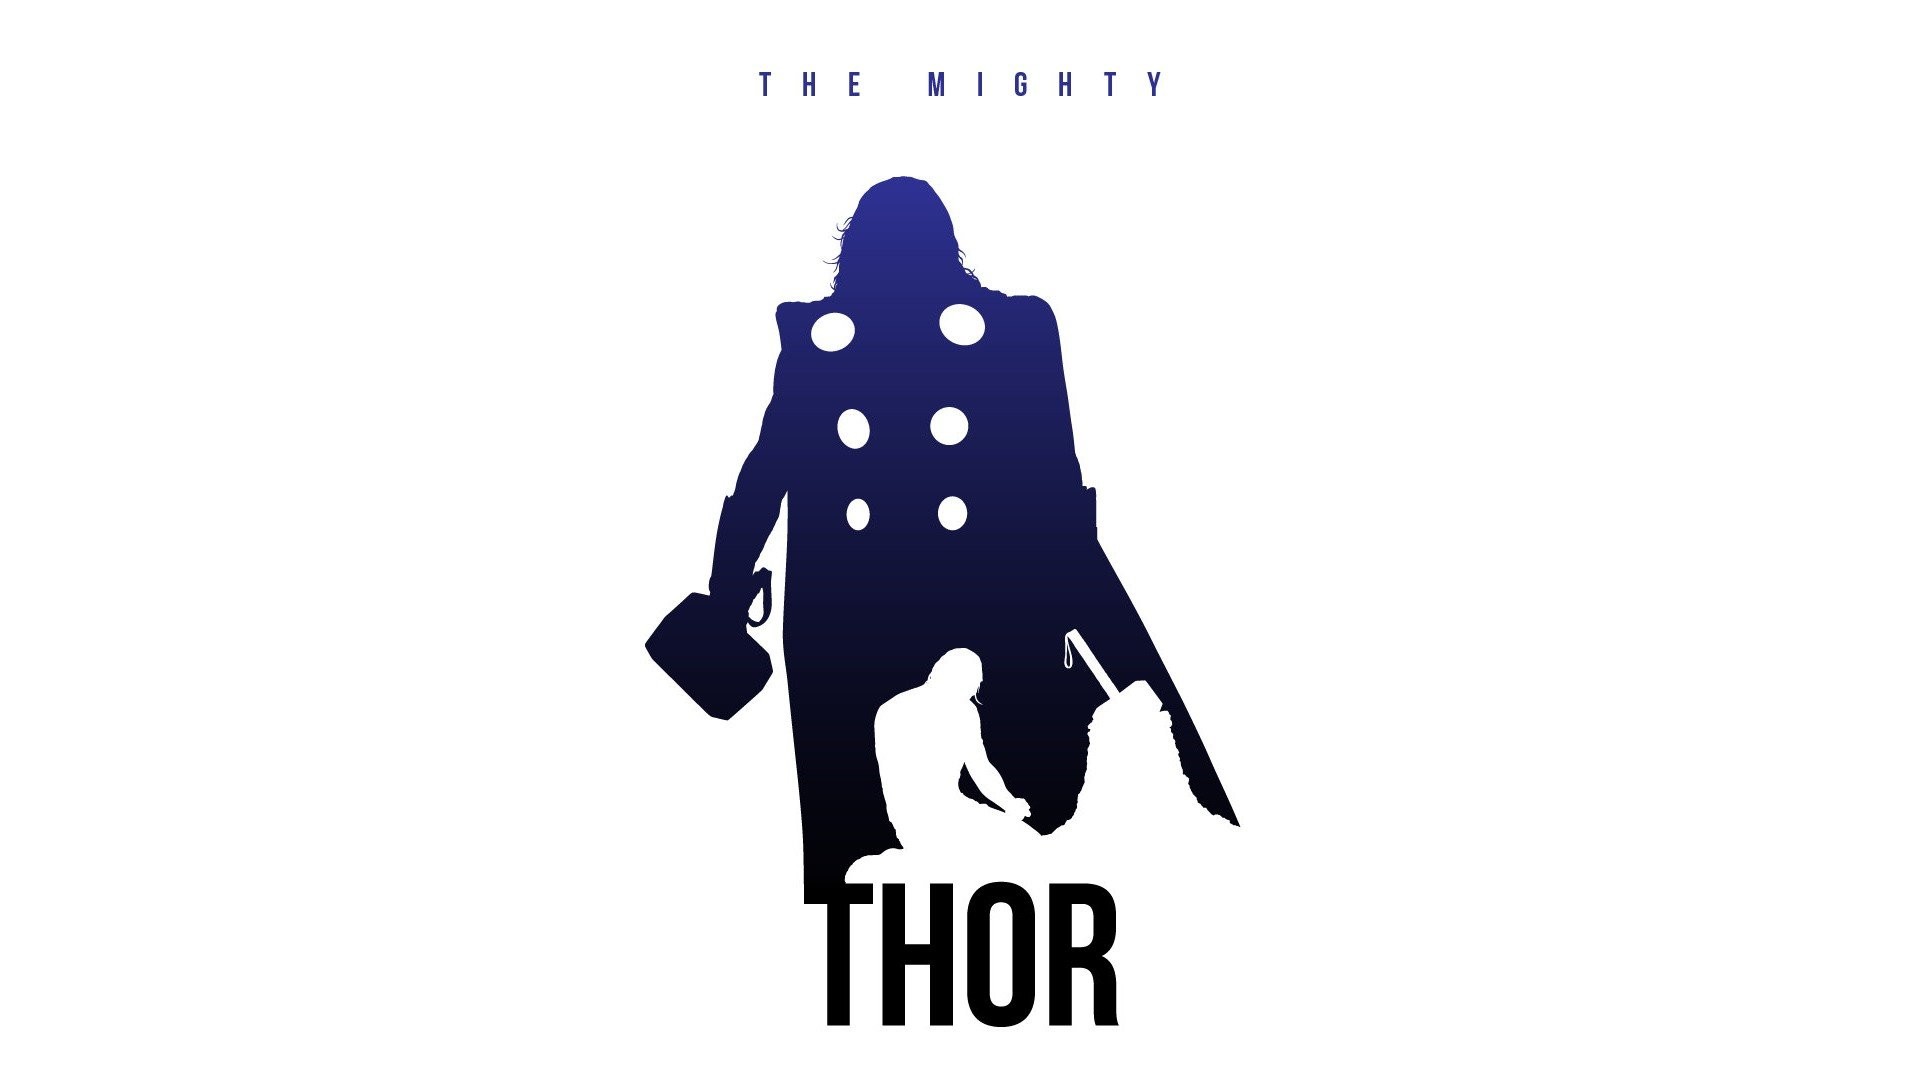 1920x1080 Fan Art Marvel Comics Minimalistic Posters Silhouettes The Avengers Thor  White Background